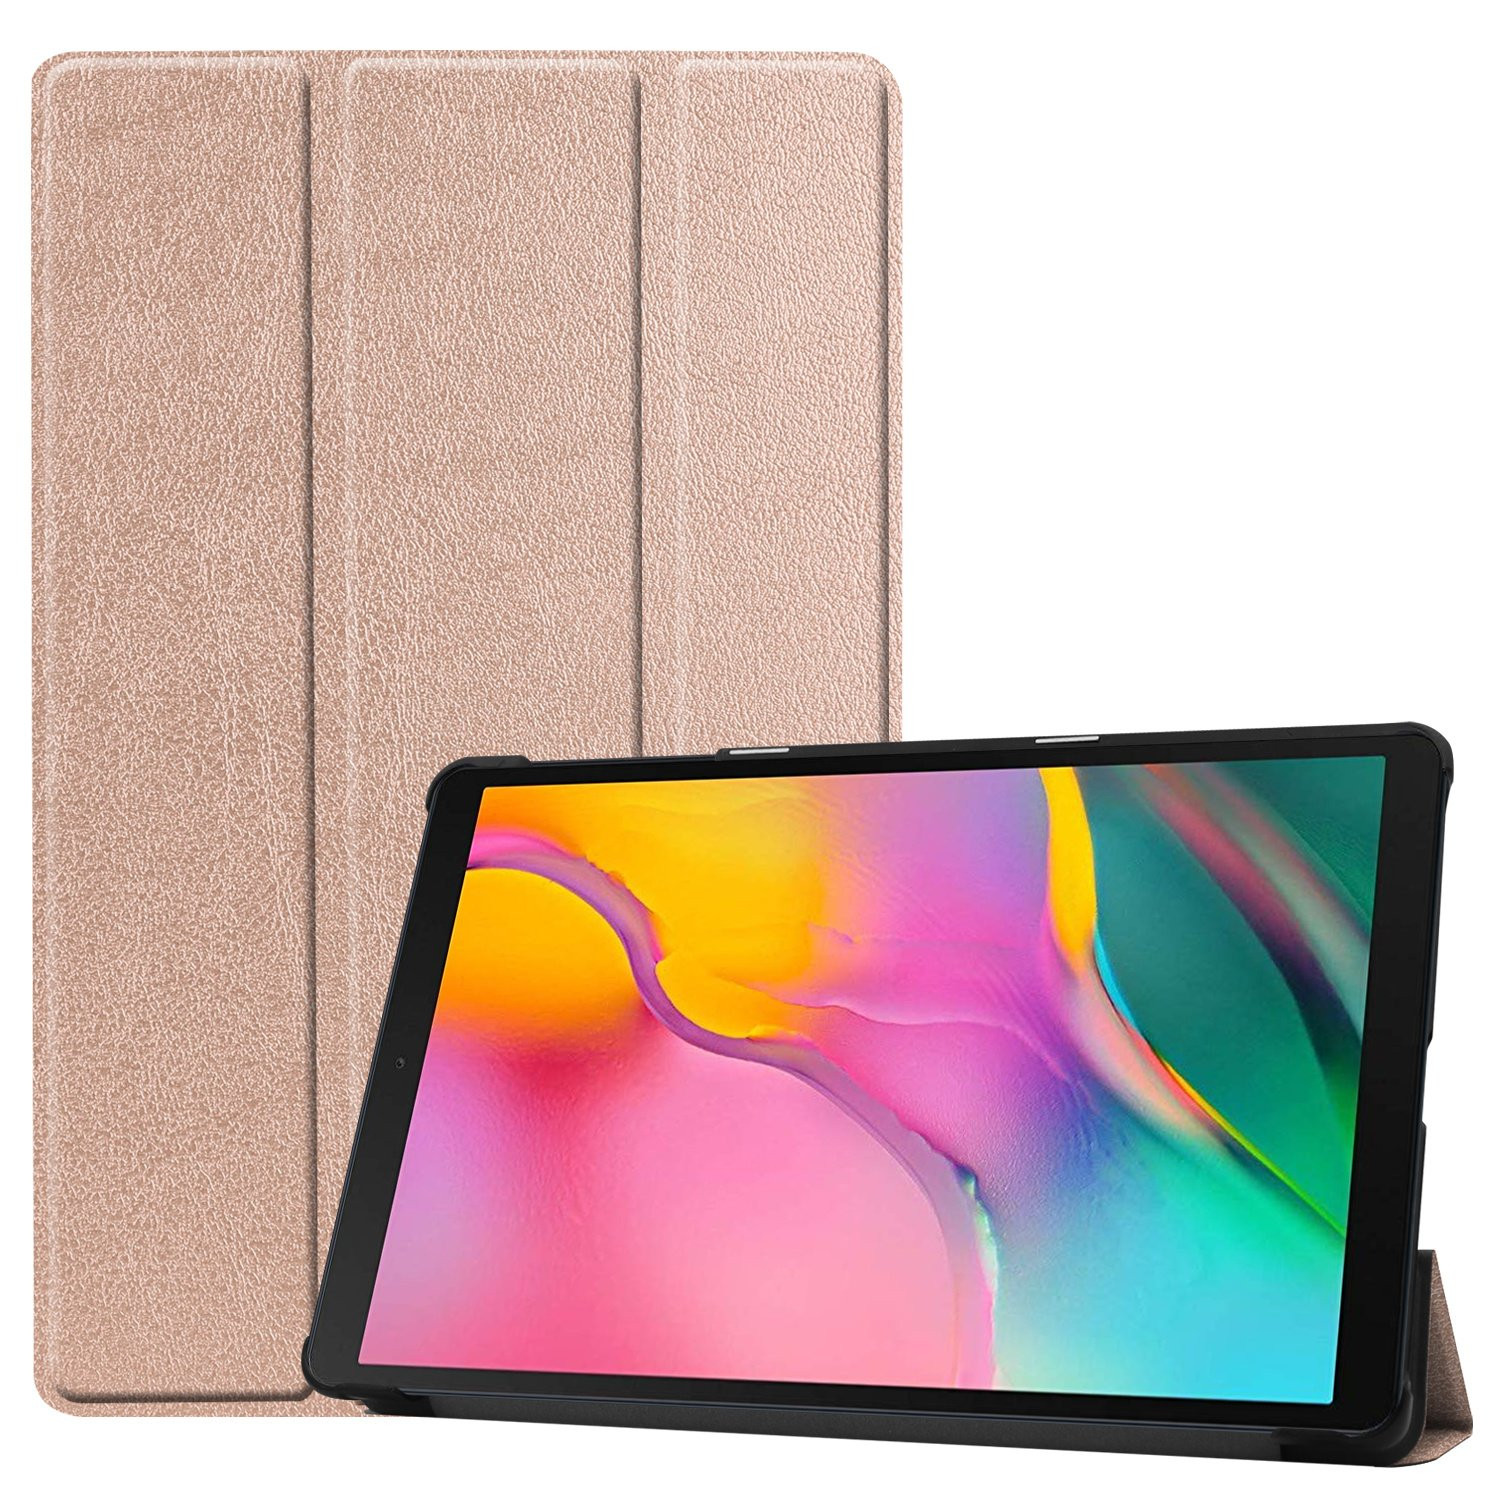 3-Vouw cover hoes - Samsung Galaxy Tab A 10.1 inch (2019) - Rose Goud